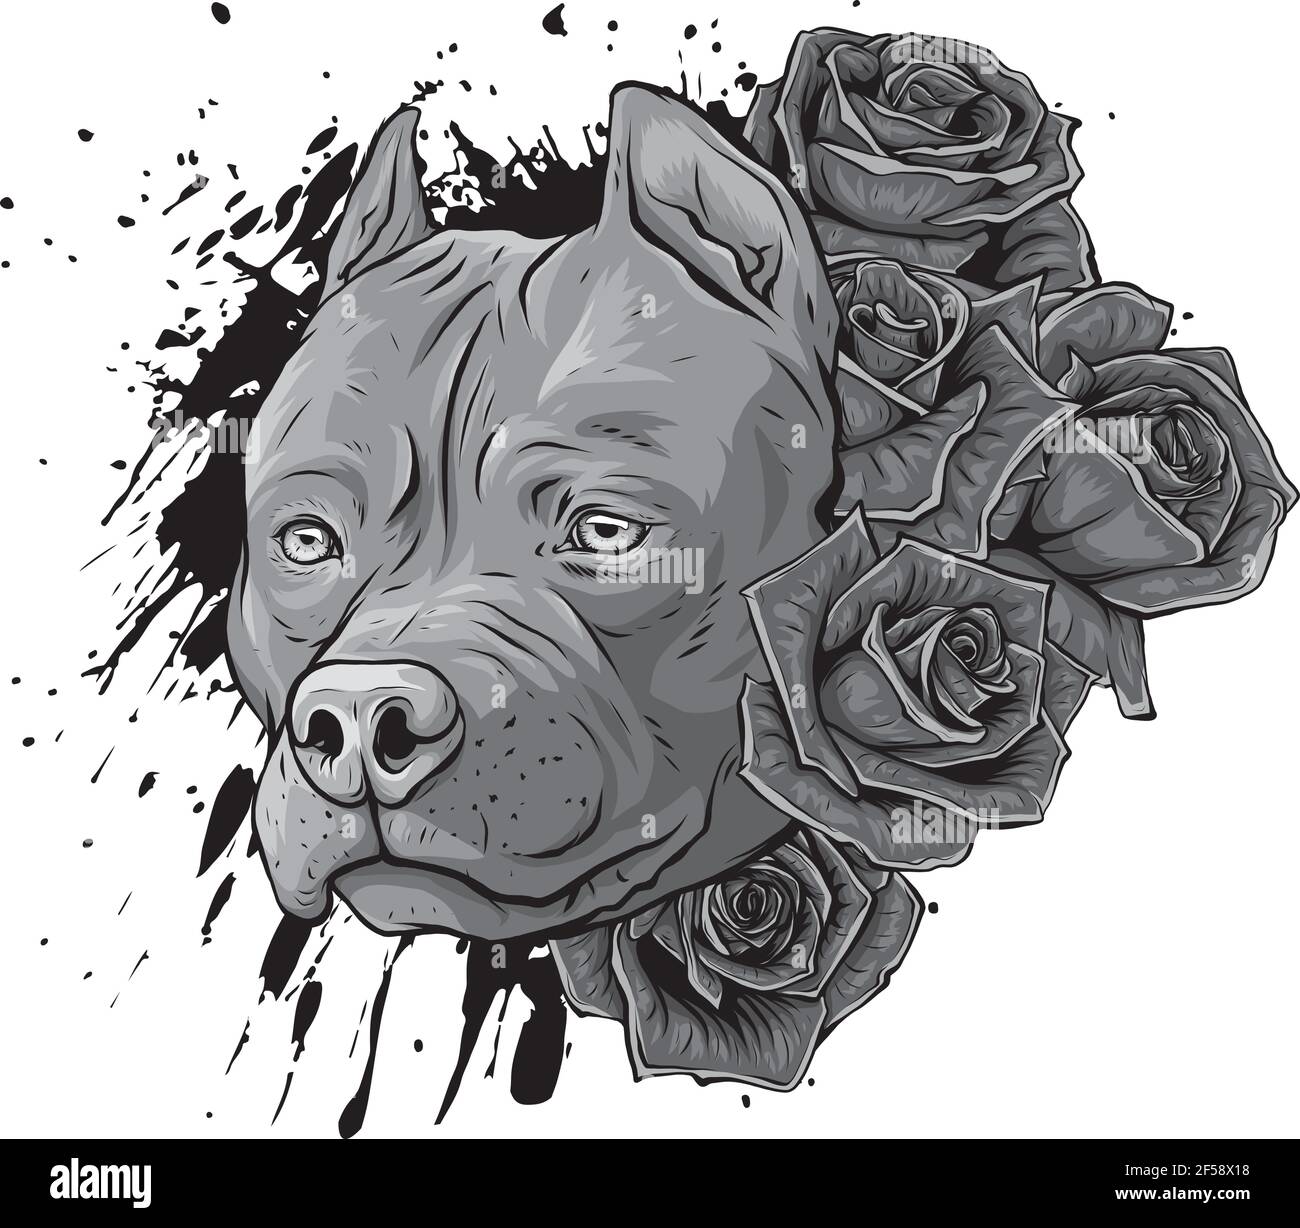 design of head dog with roses vector illustration Stock Vector